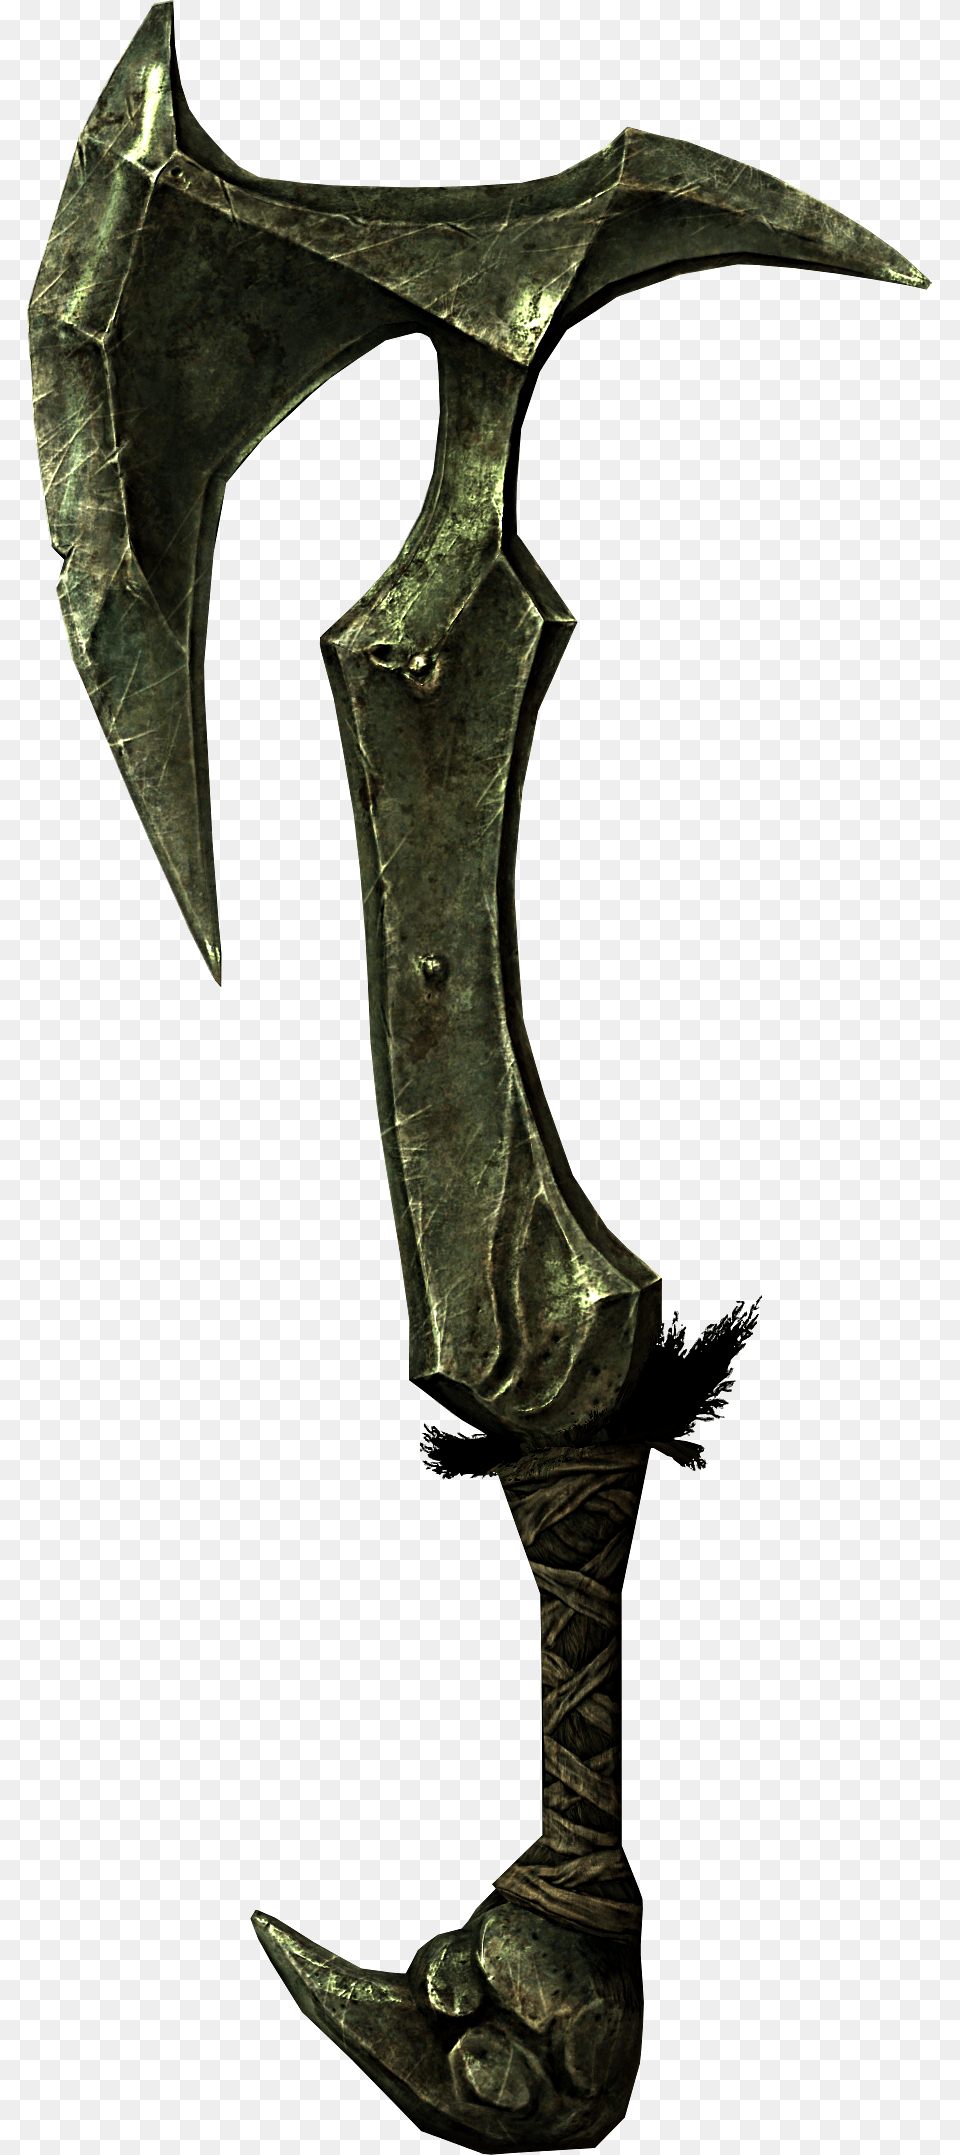 Drawn Orc Axe Skyrim Orcish War Axe, Weapon, Bronze, Blade, Dagger Free Png Download